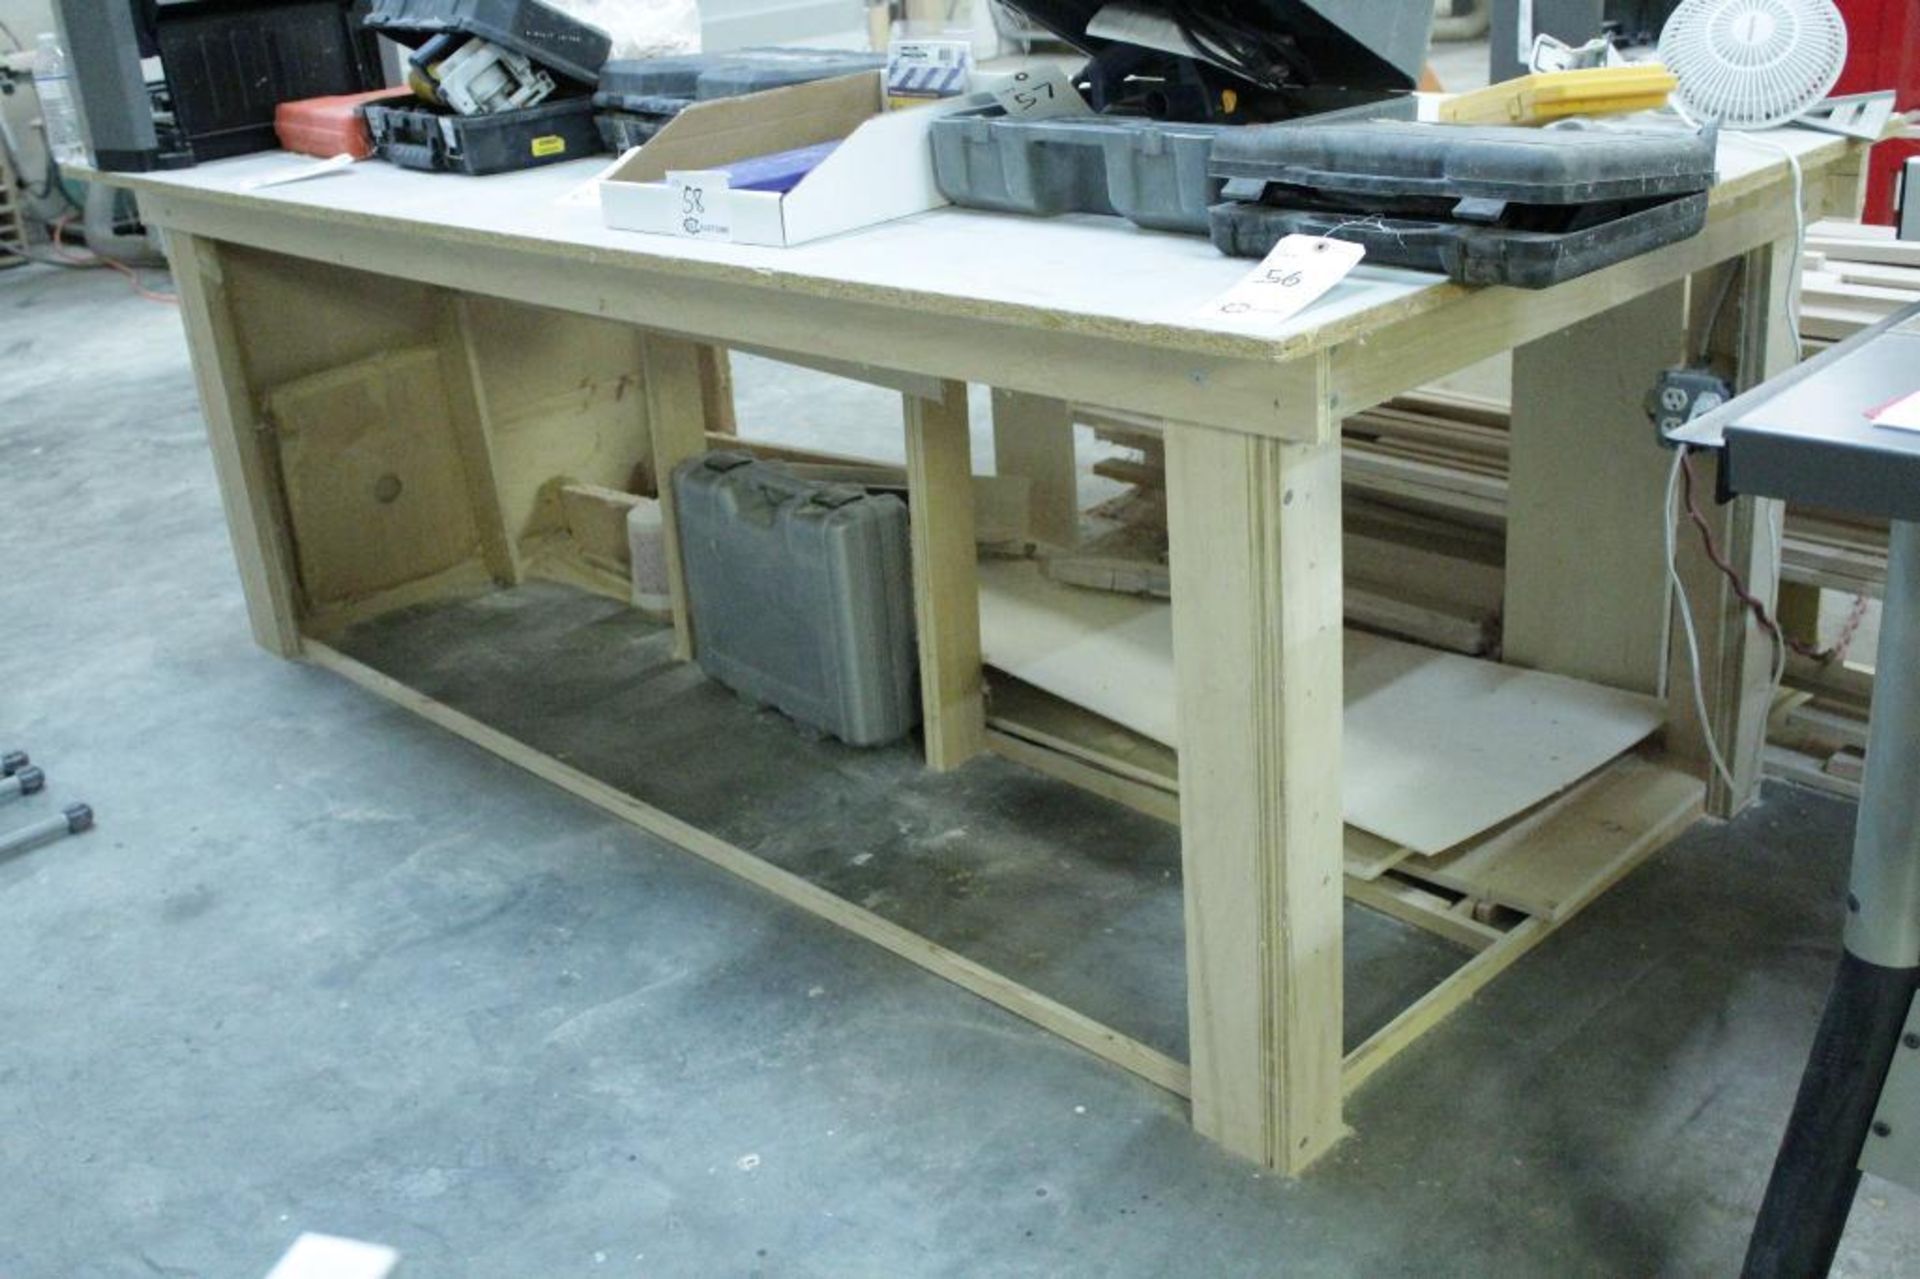 Outfeed table 97" x 49" x 36"